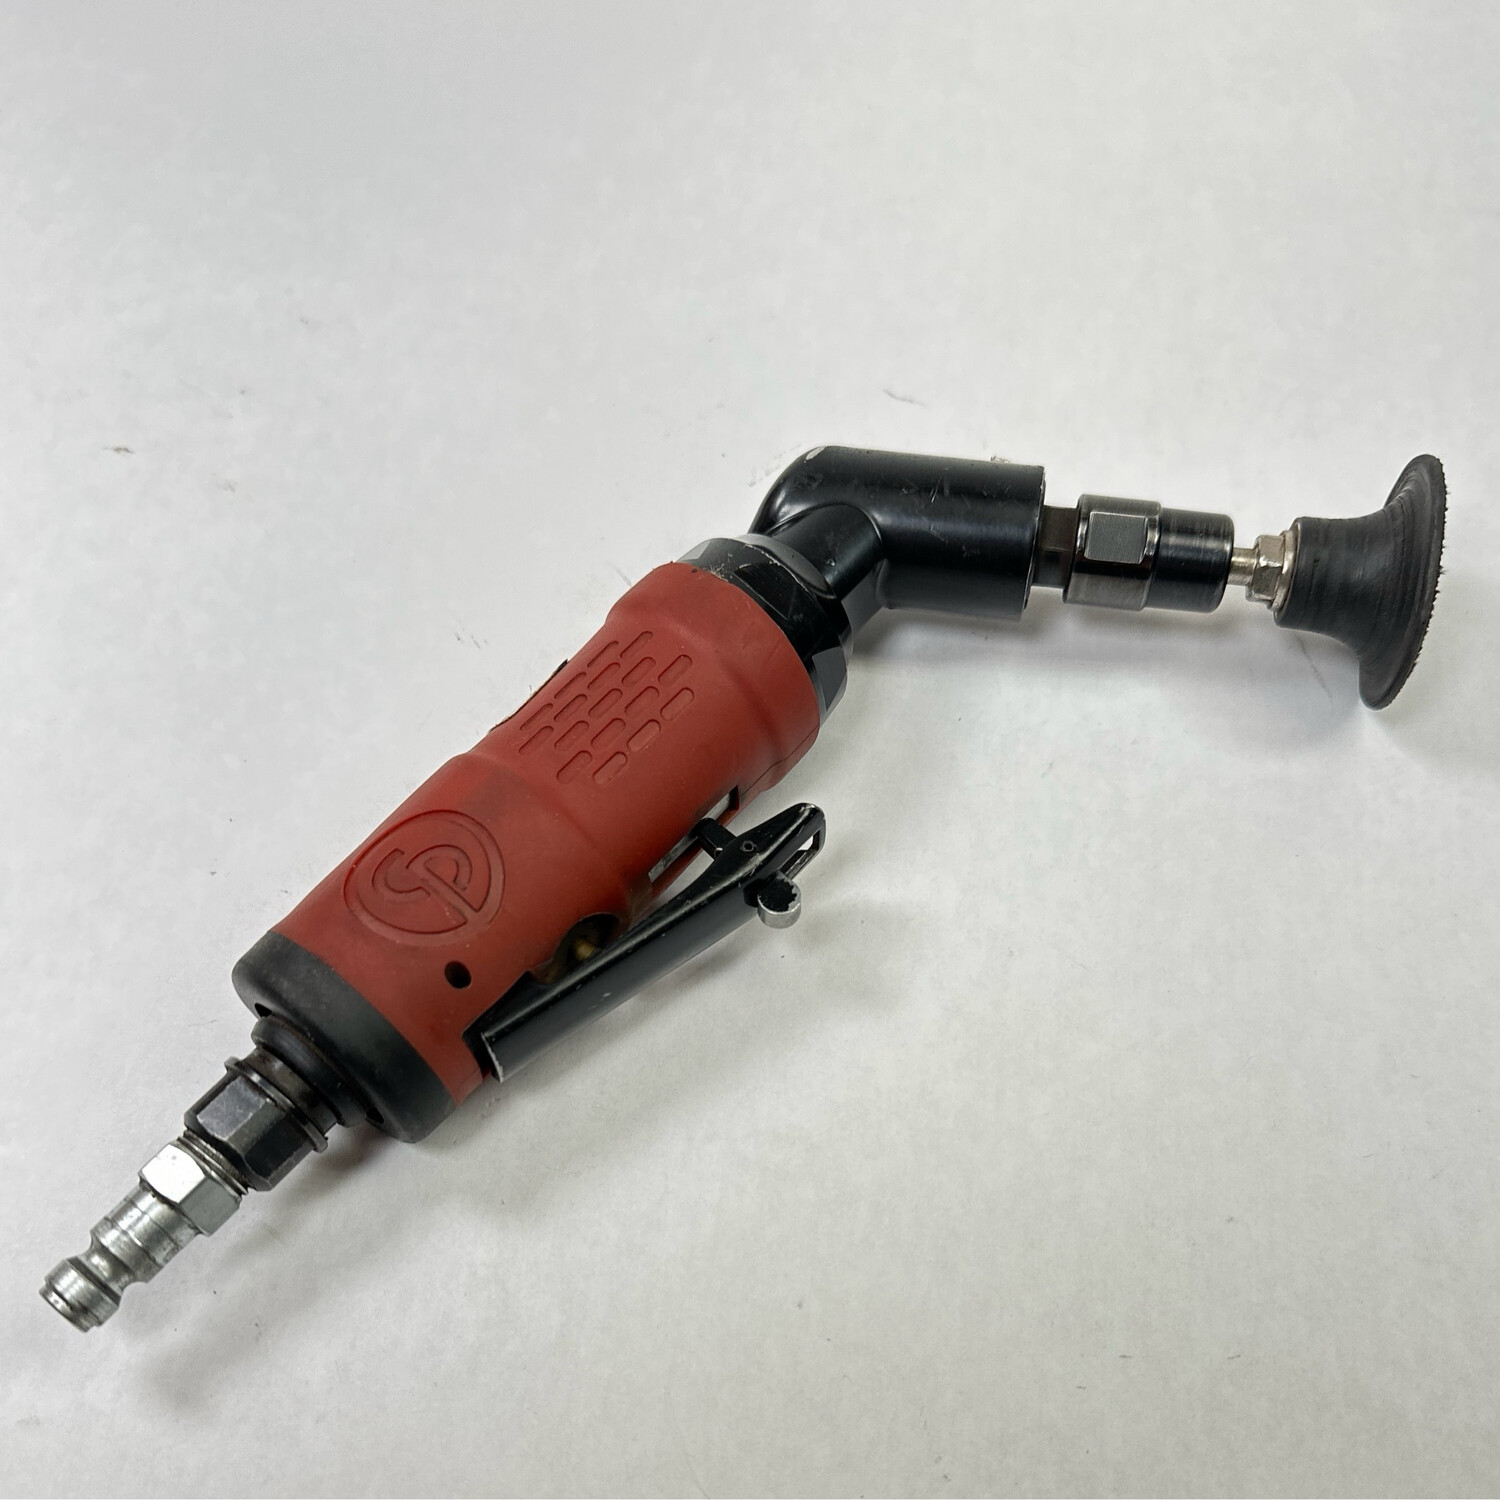 Chicago Pneumatic 1/4” 120° Angle Die Grinder, CP9108QB - Shop